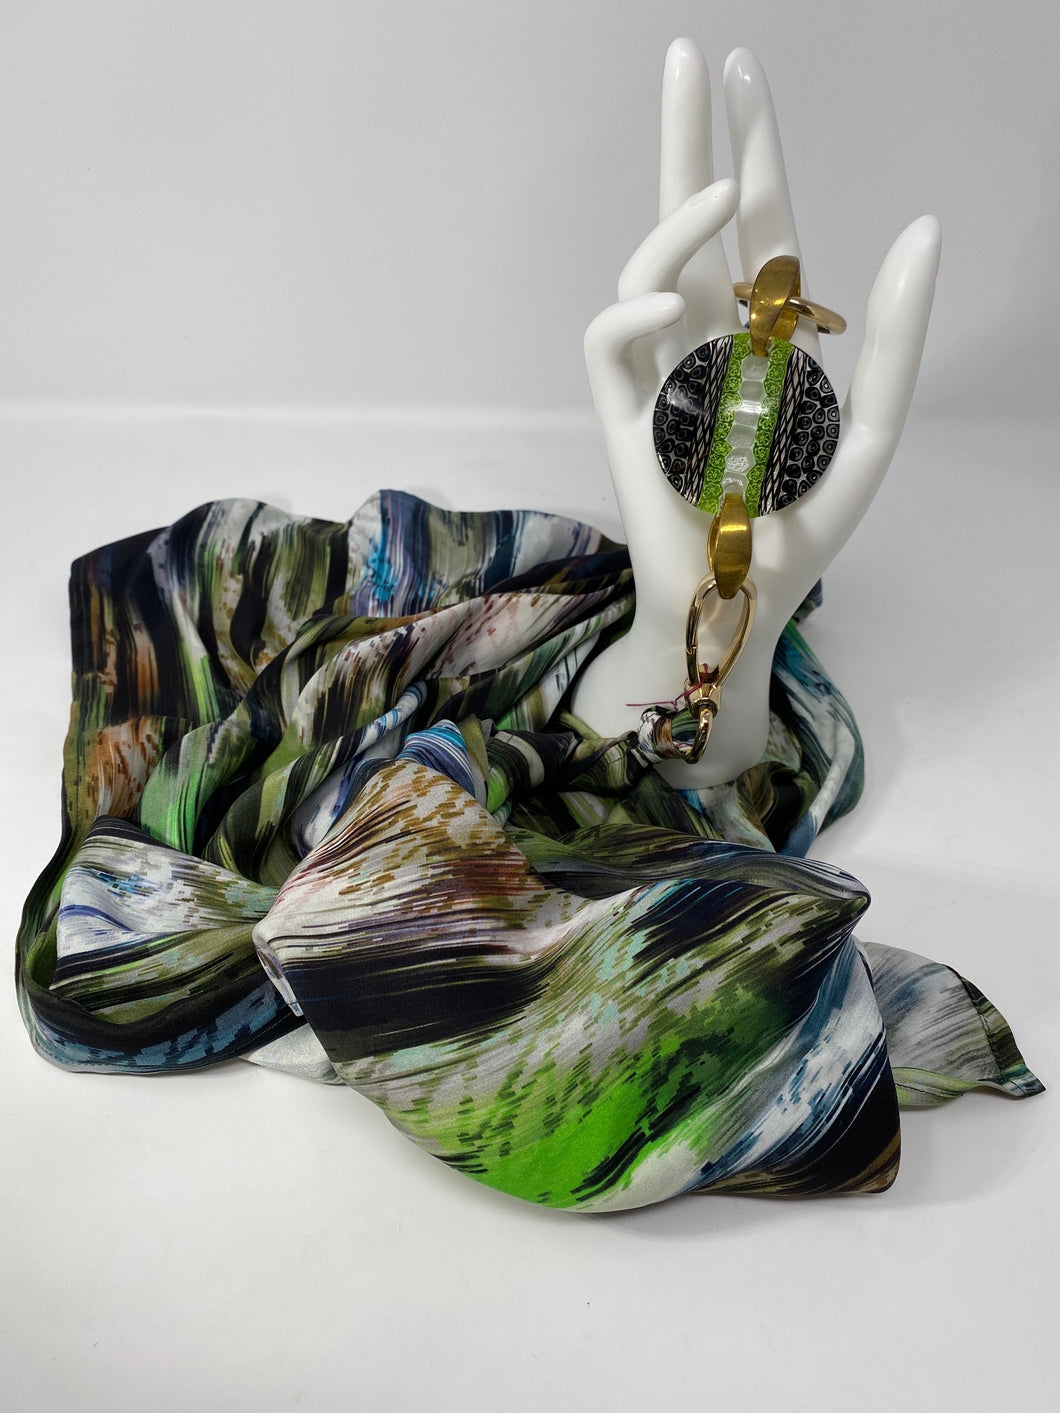 Silk Neck Scarf from Como, Italy with Murano Glass Elements.